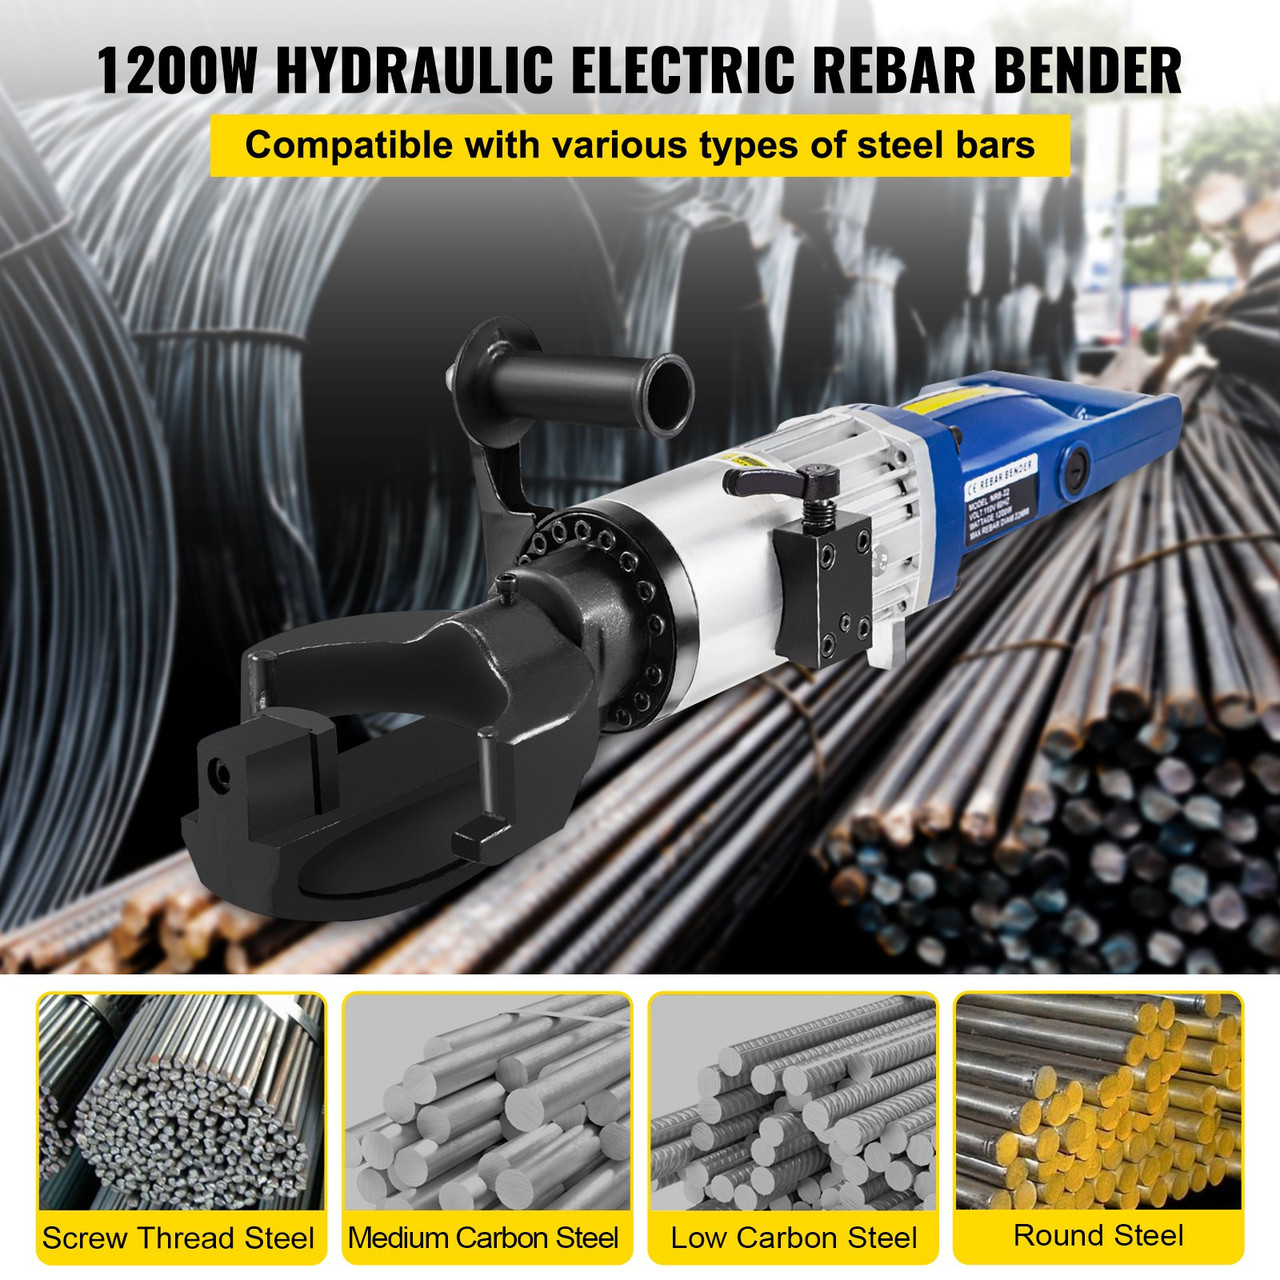 Electric Hydraulic Rebar Bender, 1.2 KW 0.9 inch 22 mm Hand Held Rebar Bender 110 V Portable Electric Rebar Bender, within 5 s